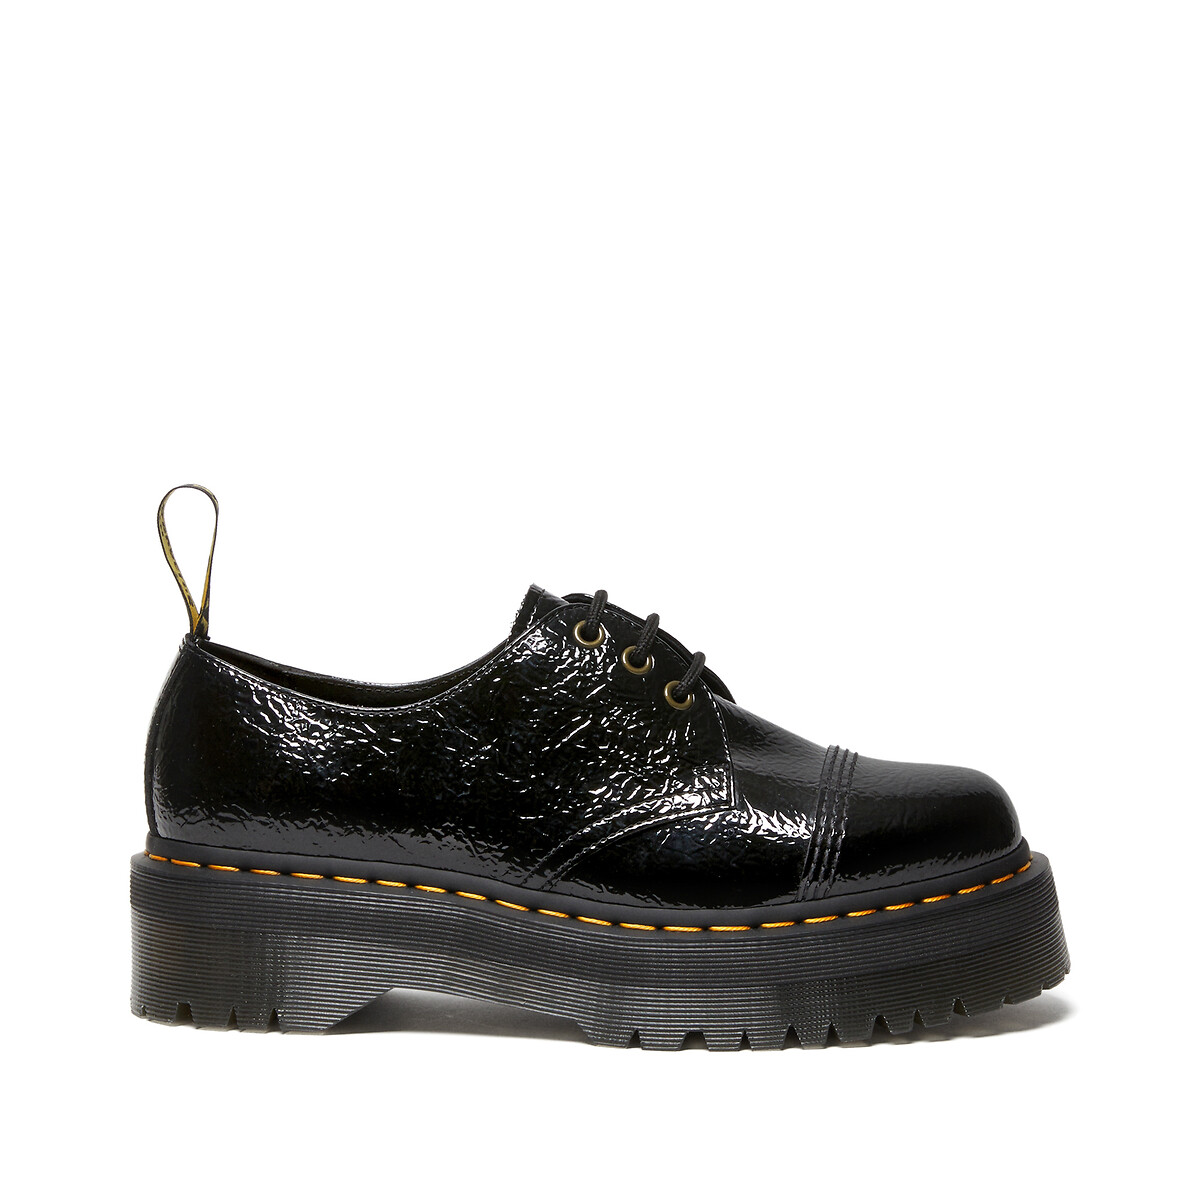 1461 Quad Distressed Platform Brogues in Patent Leather